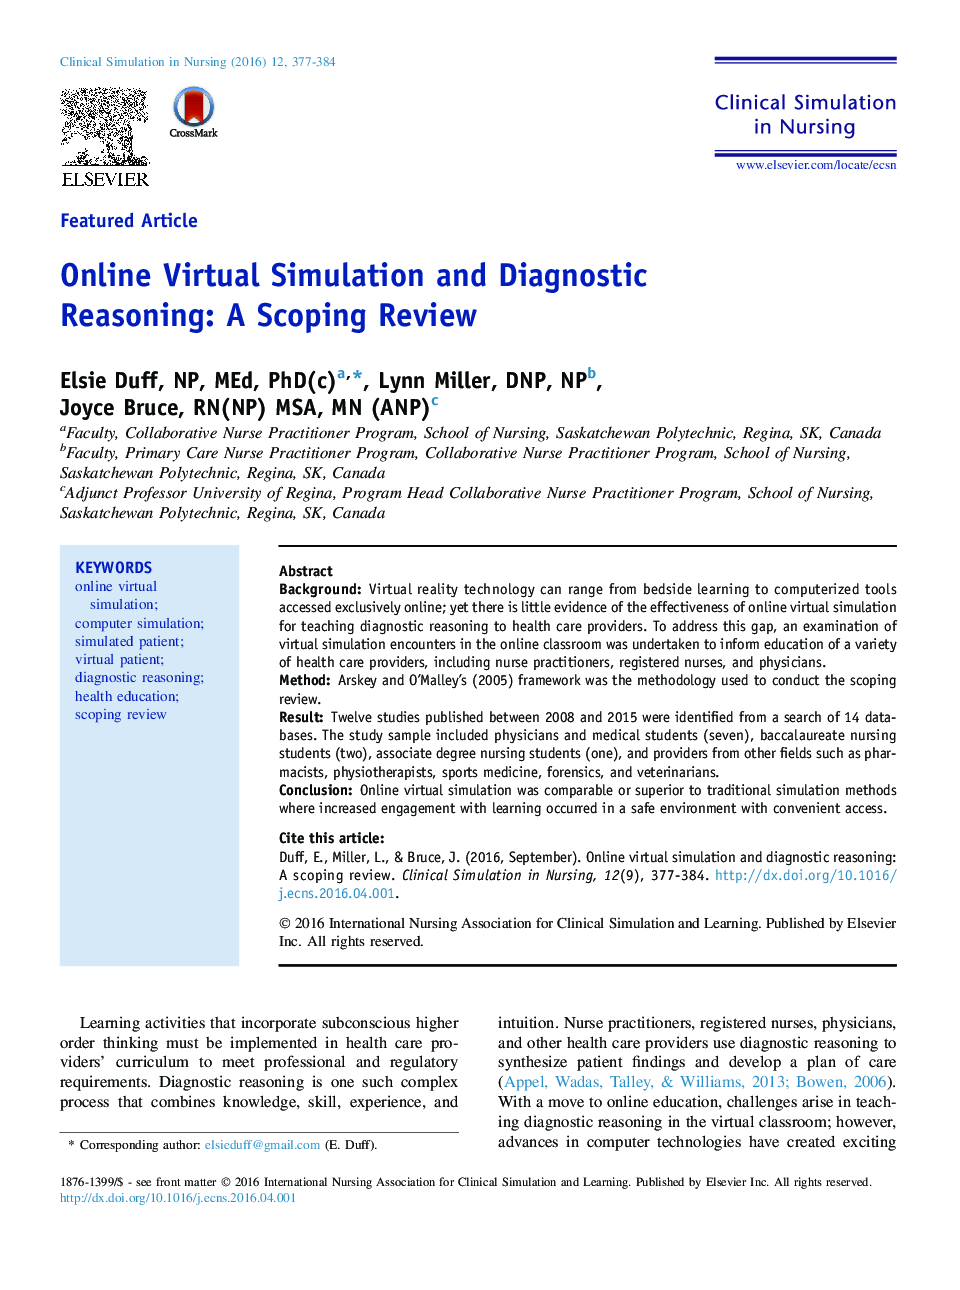 Online Virtual Simulation and Diagnostic Reasoning: A Scoping Review